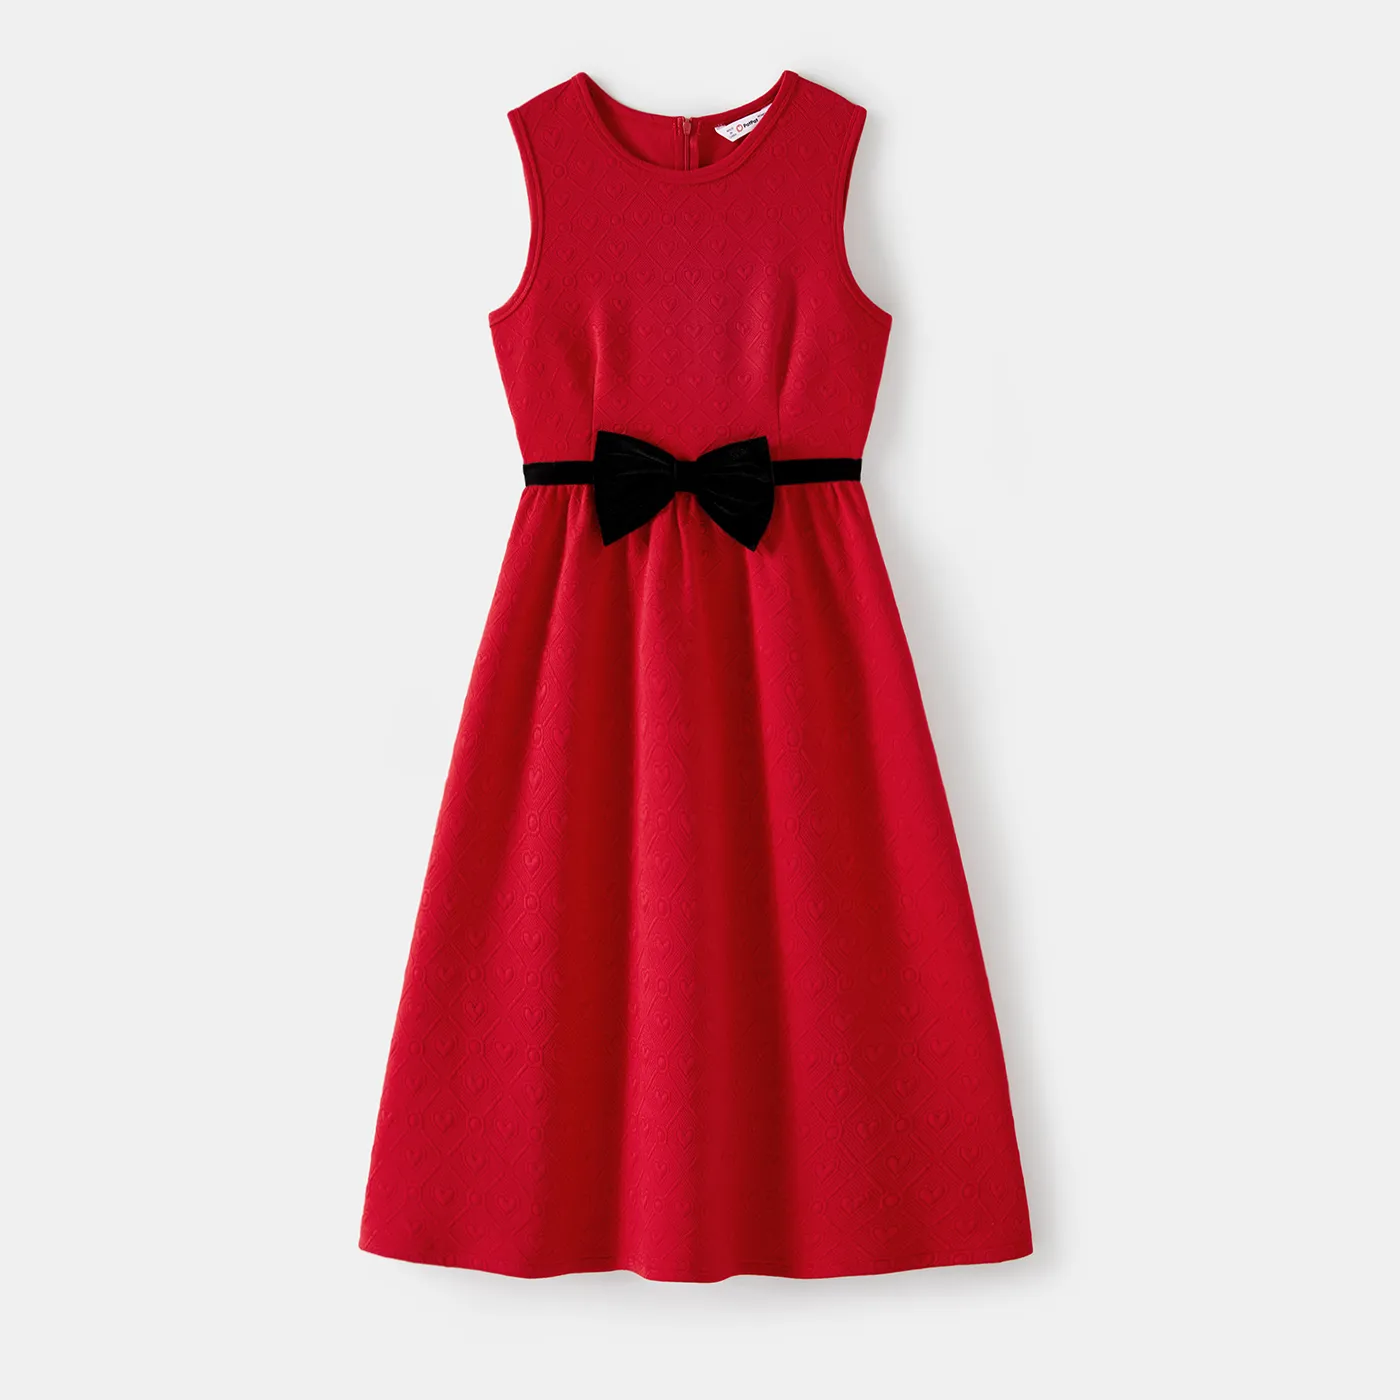 Family Matching Bow Front Red Heart Textured Tank Dresses And Long-sleeve Corduroy Shirts Sets